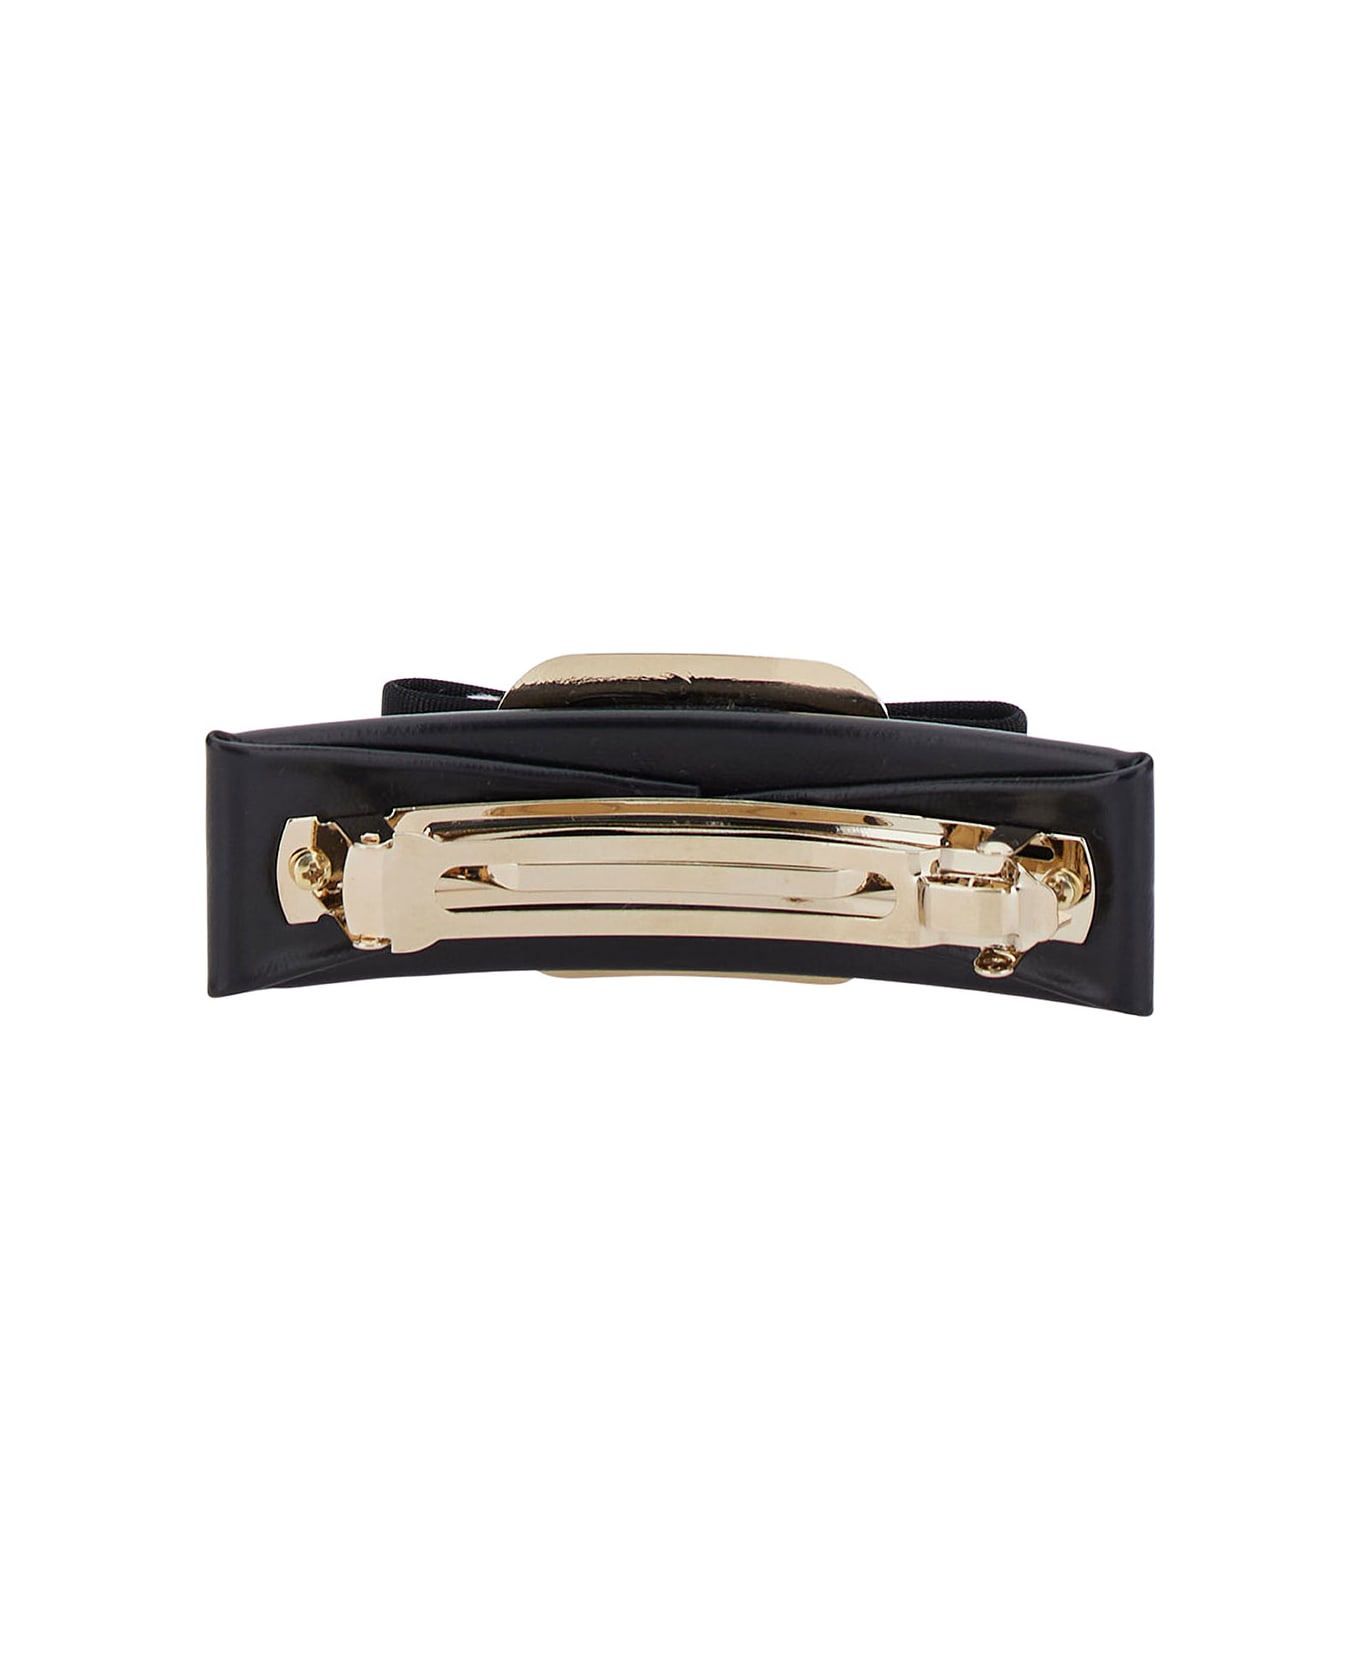 Ferragamo Black Hairclip With Vara Bow In Leather Blend Woman - Black